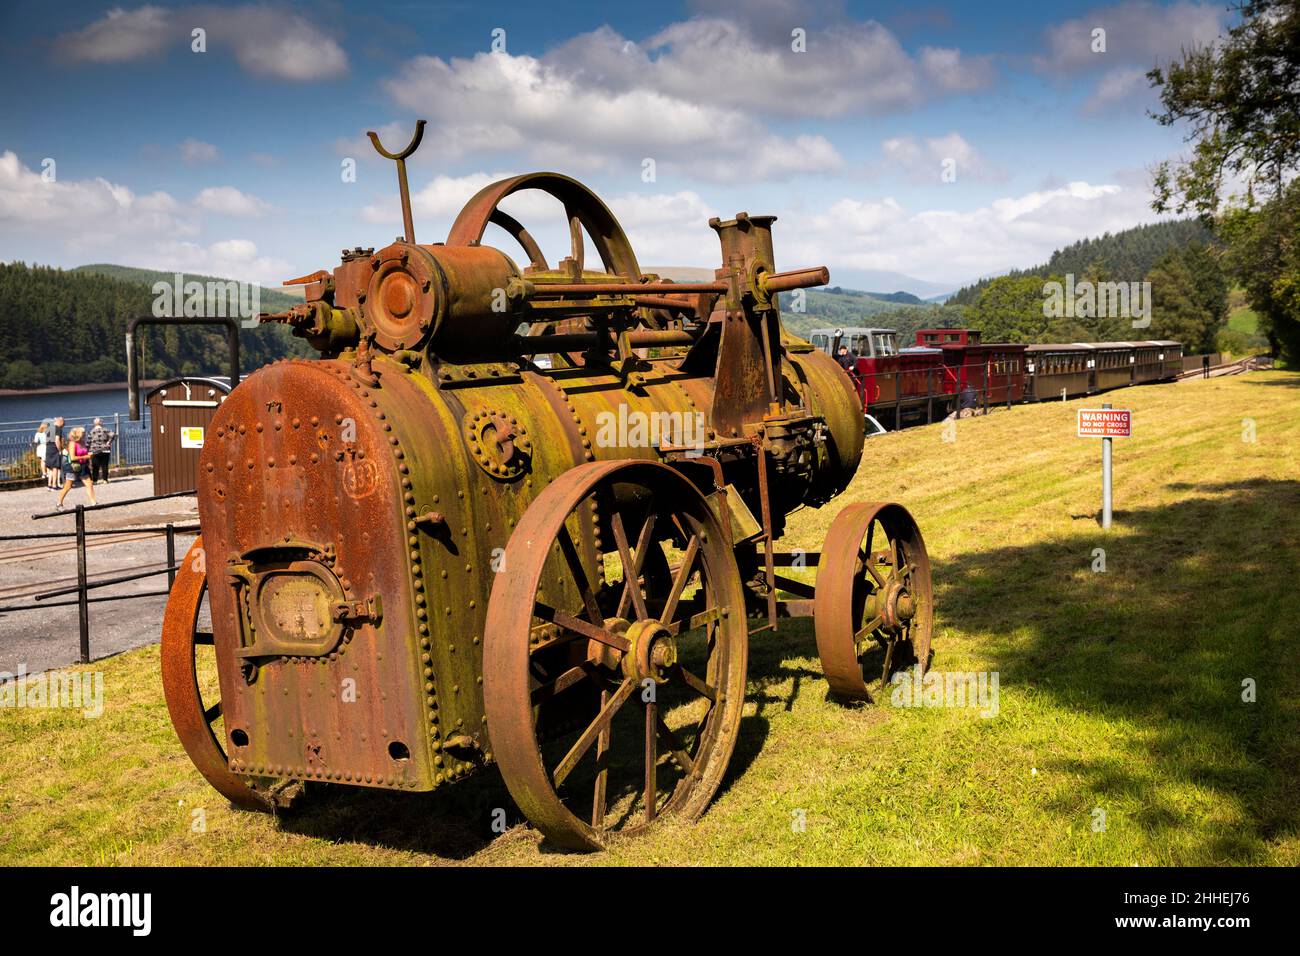 UK, Wales, Merthyr Tydfil, Brecon Mountain Railway, Pontsticill station, rusting traction engine Stock Photo